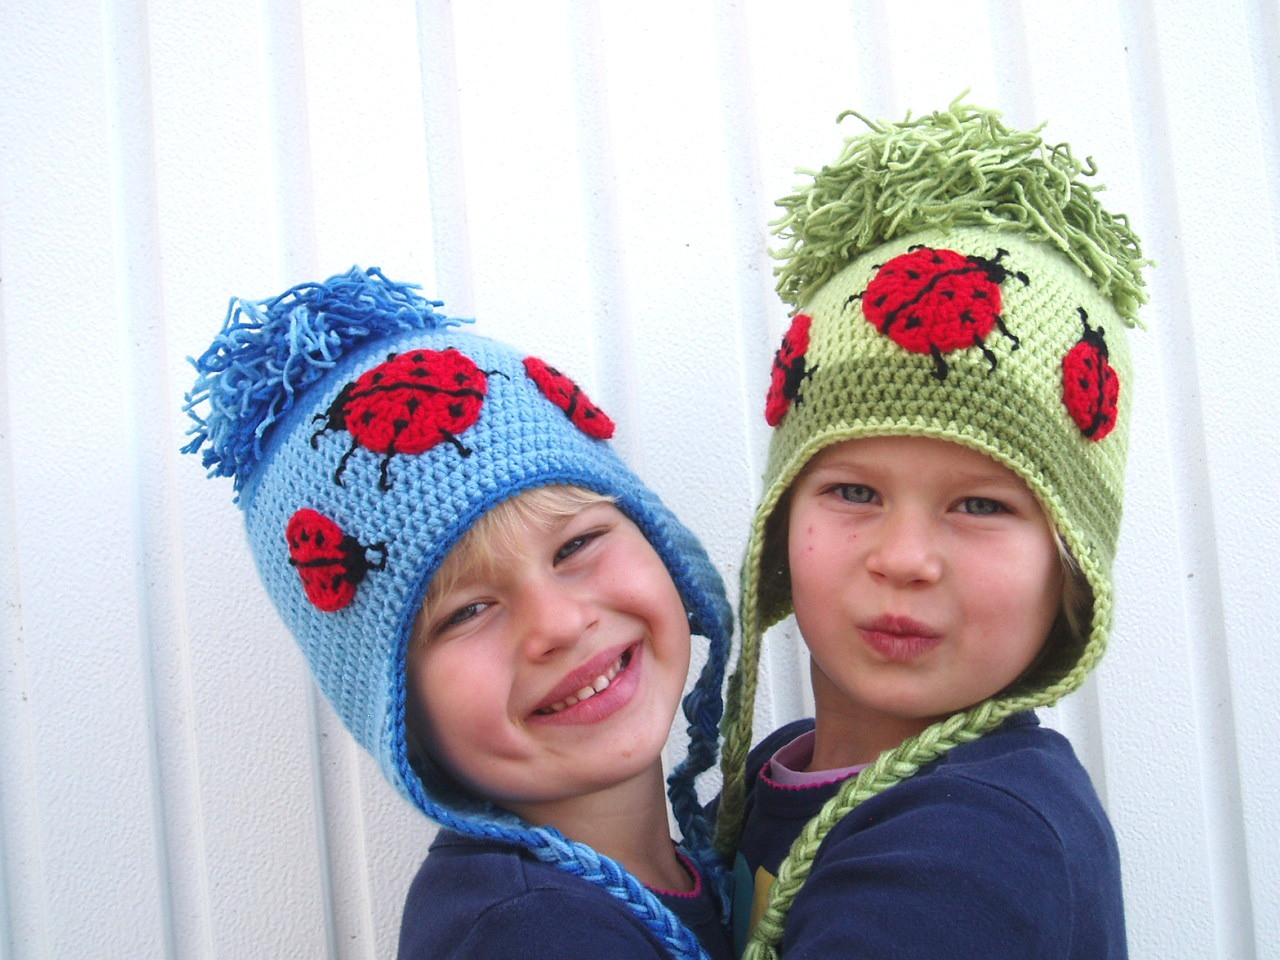 Childrens Crochet Hat And Scarf Patterns Lovely 46 Photos Childrens Crochet Hat Patterns